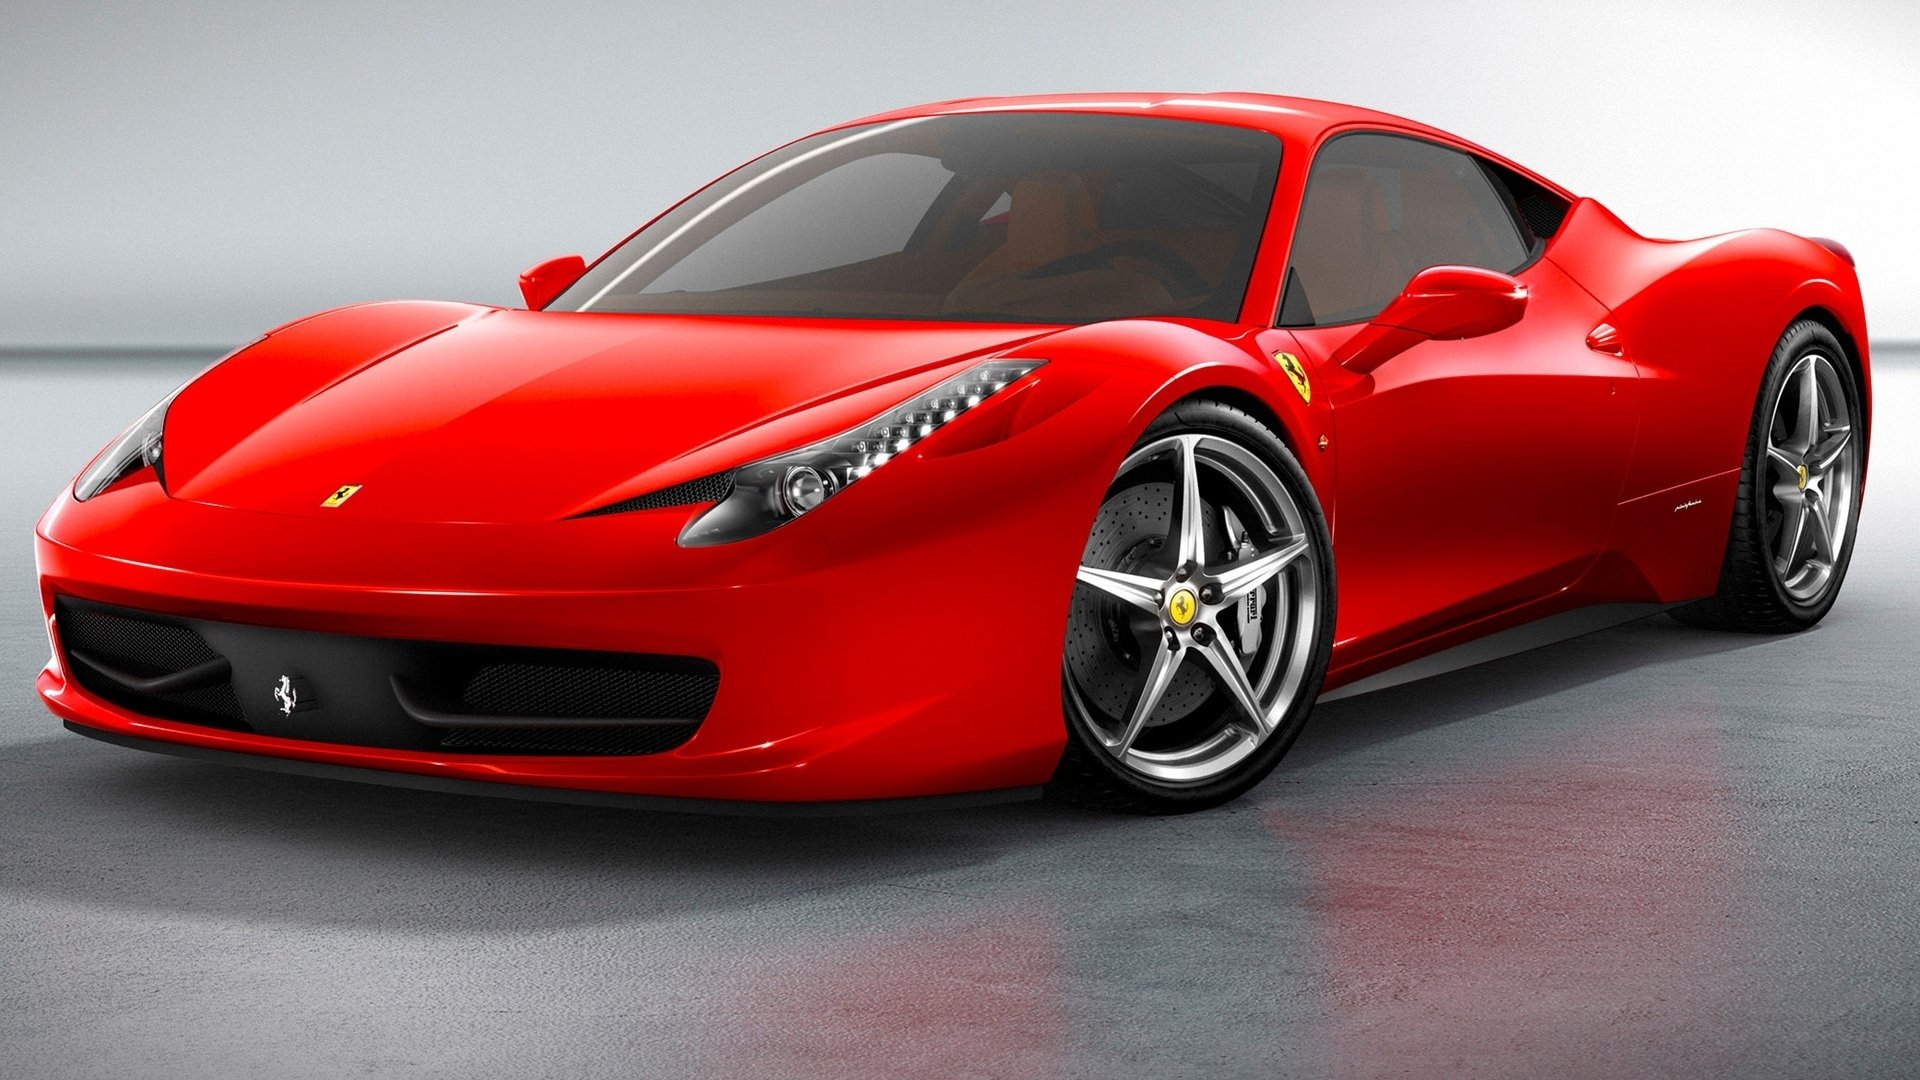 Ferrari 458 Italia Wallpapers and Background Images   stmednet 1920x1080